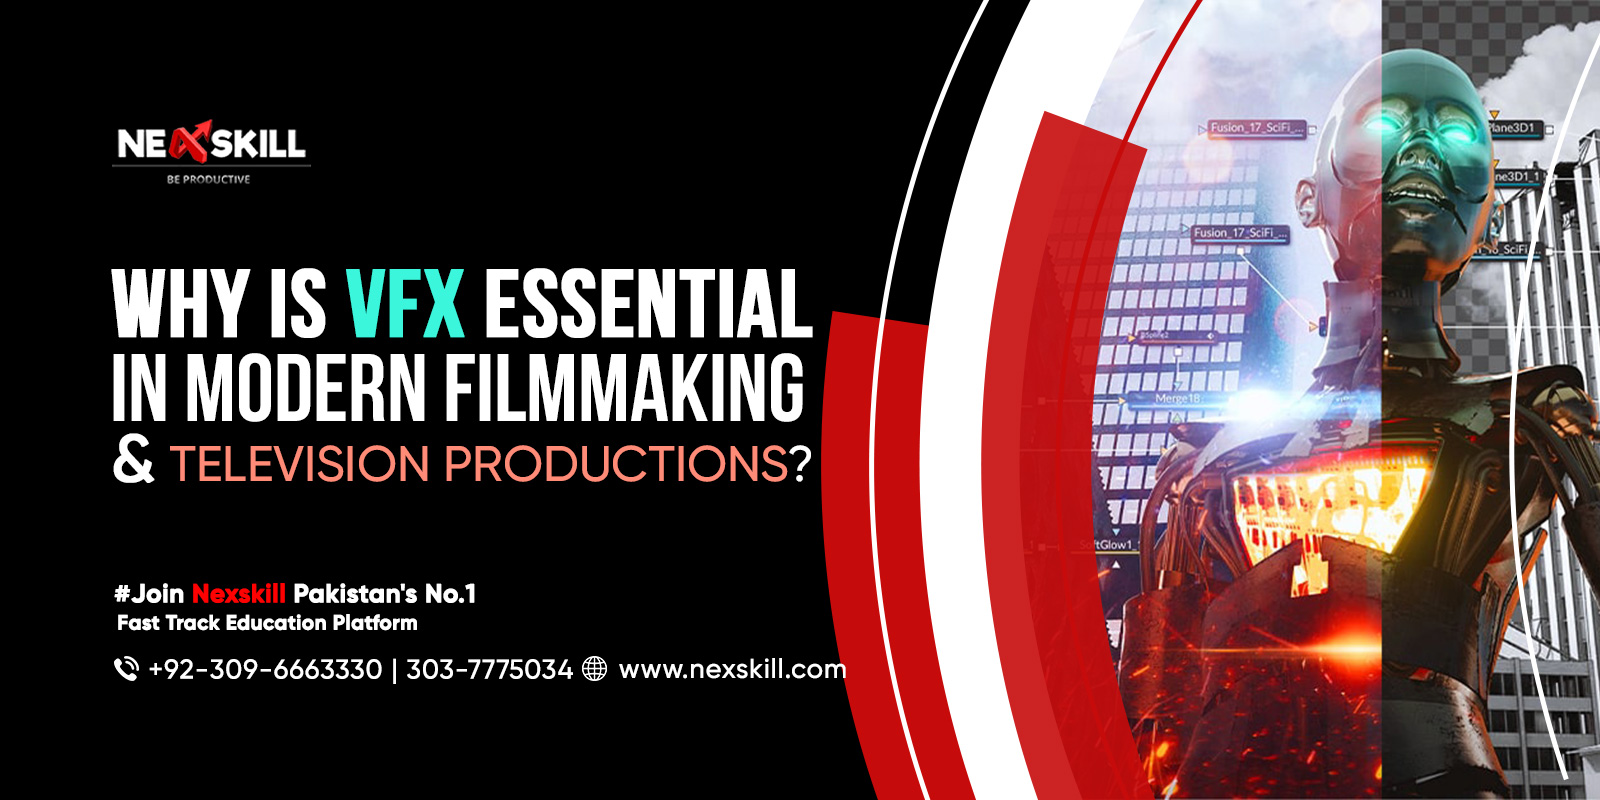 Why is VFX Essential in Modern Filmmaking and Television Productions?